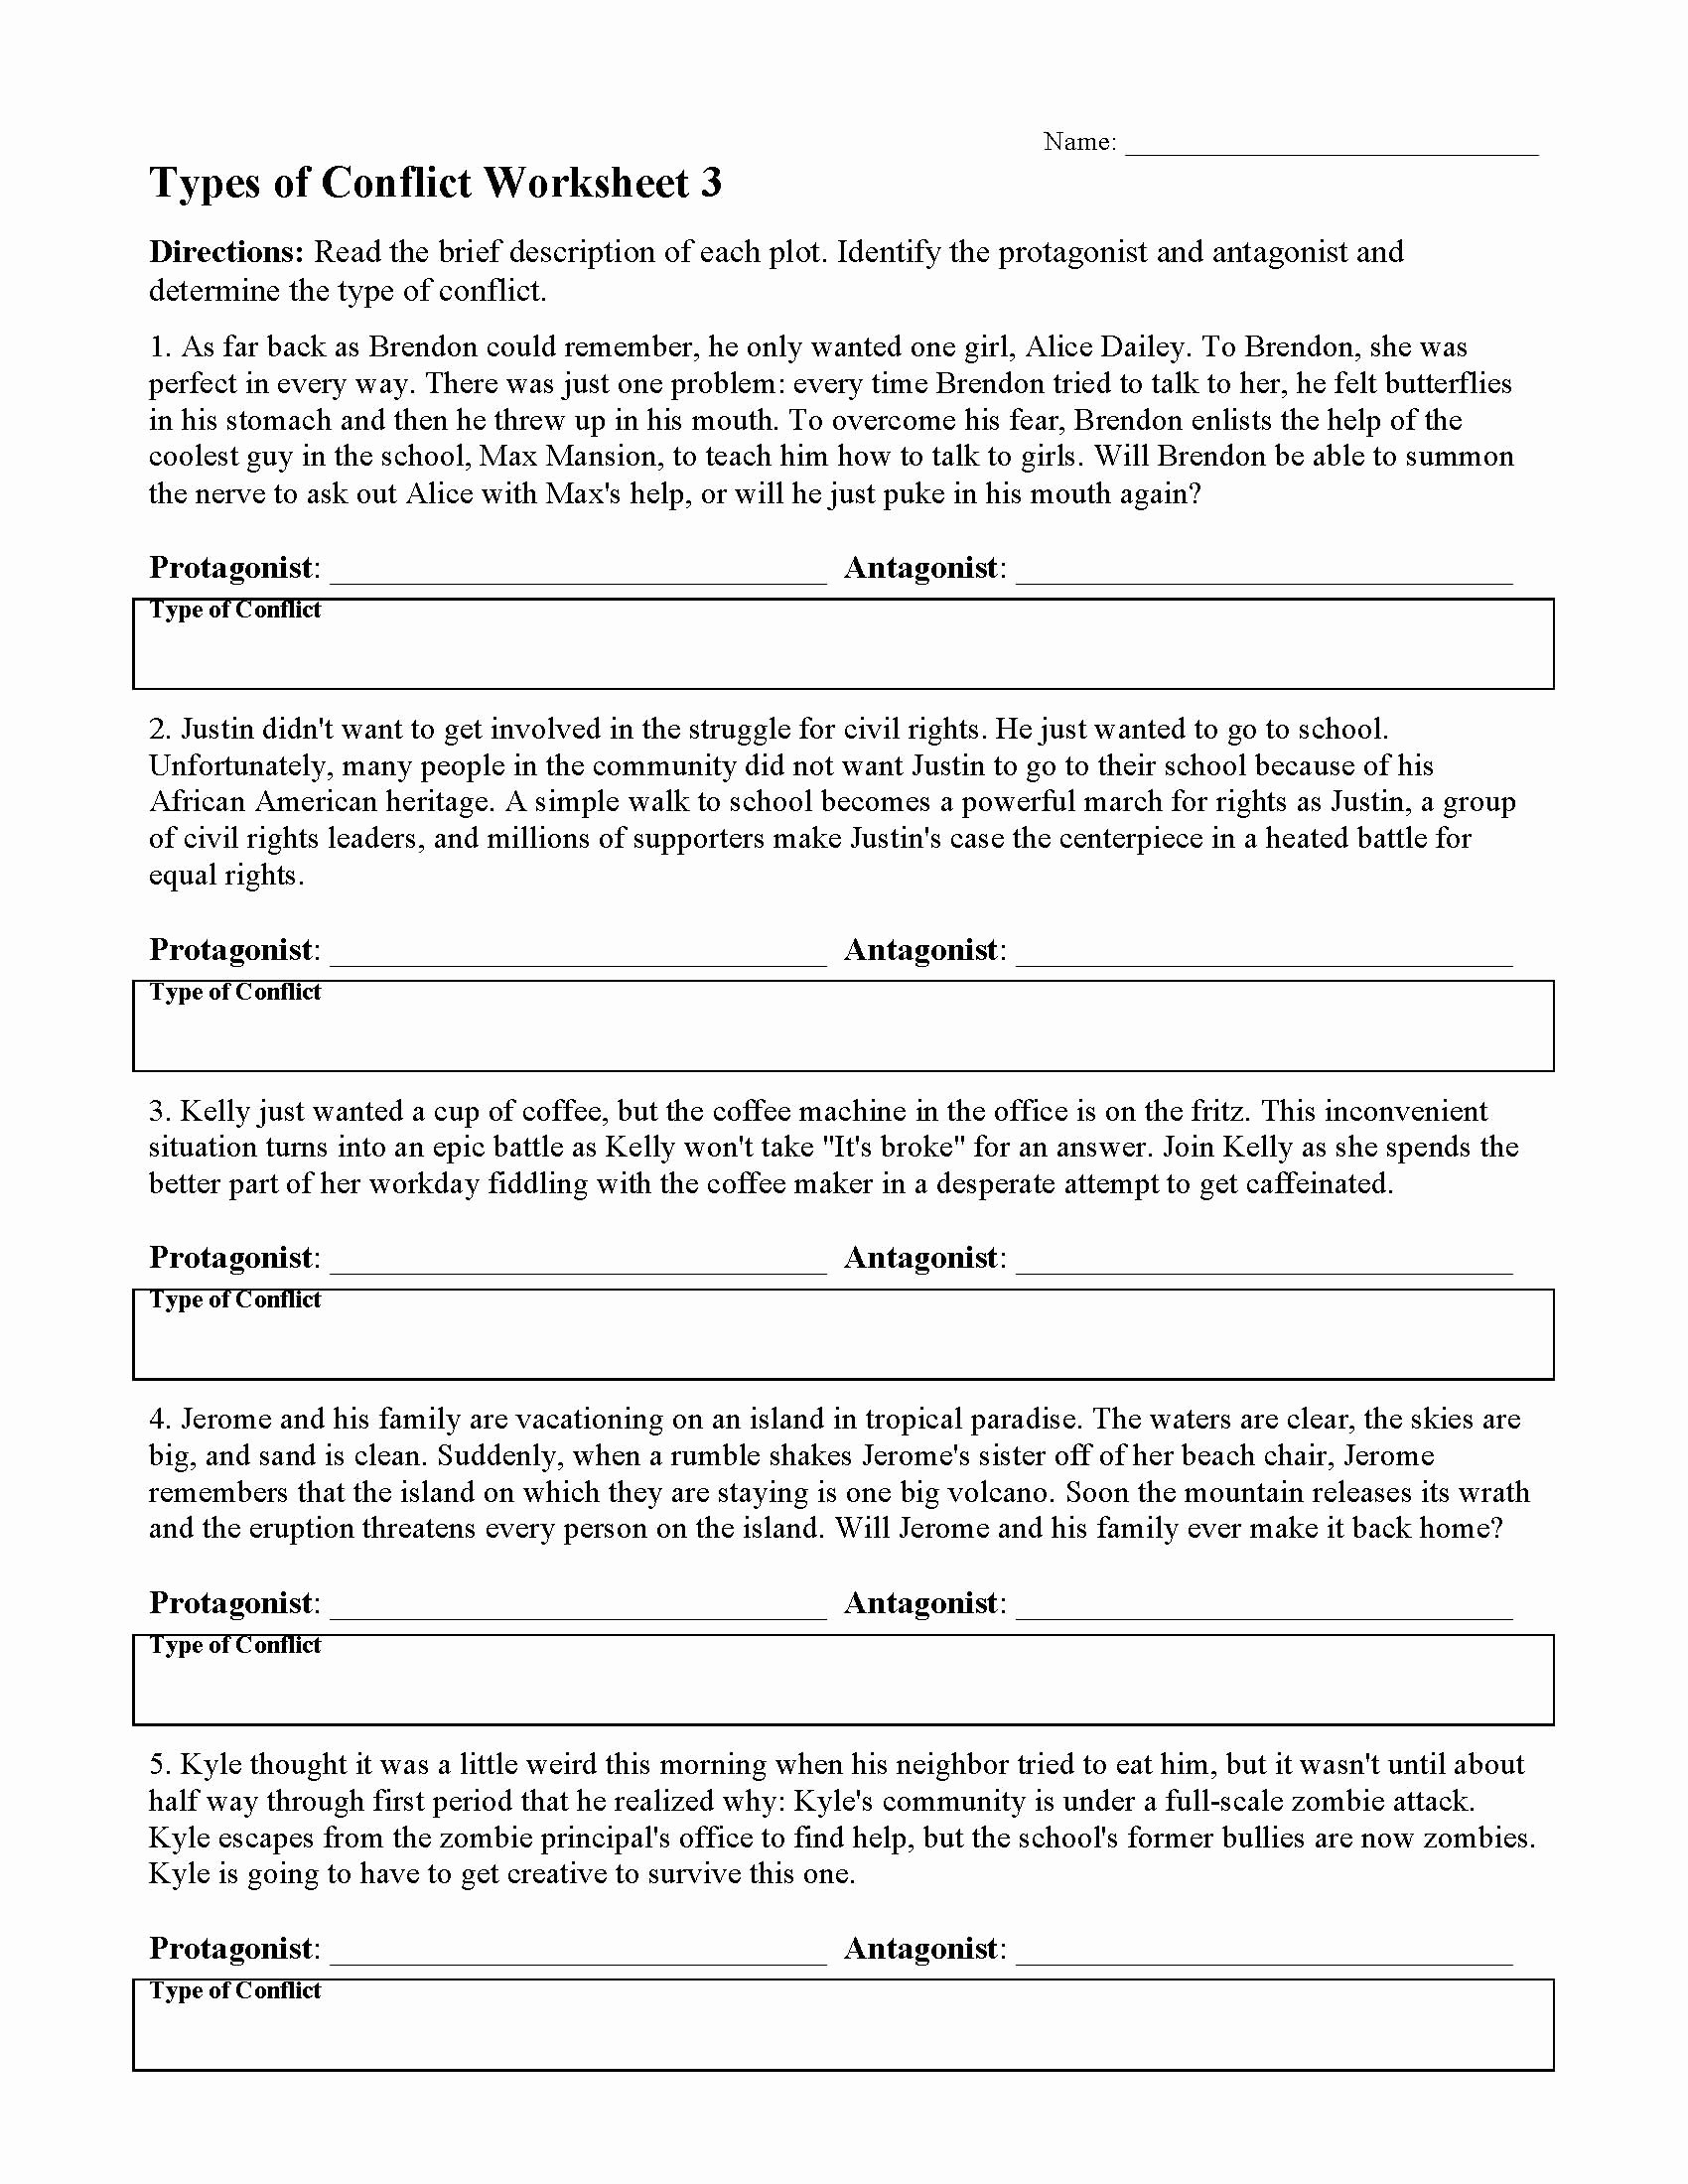 Types Of Conflict Worksheet Inspirational Types Of Conflict Worksheet 3